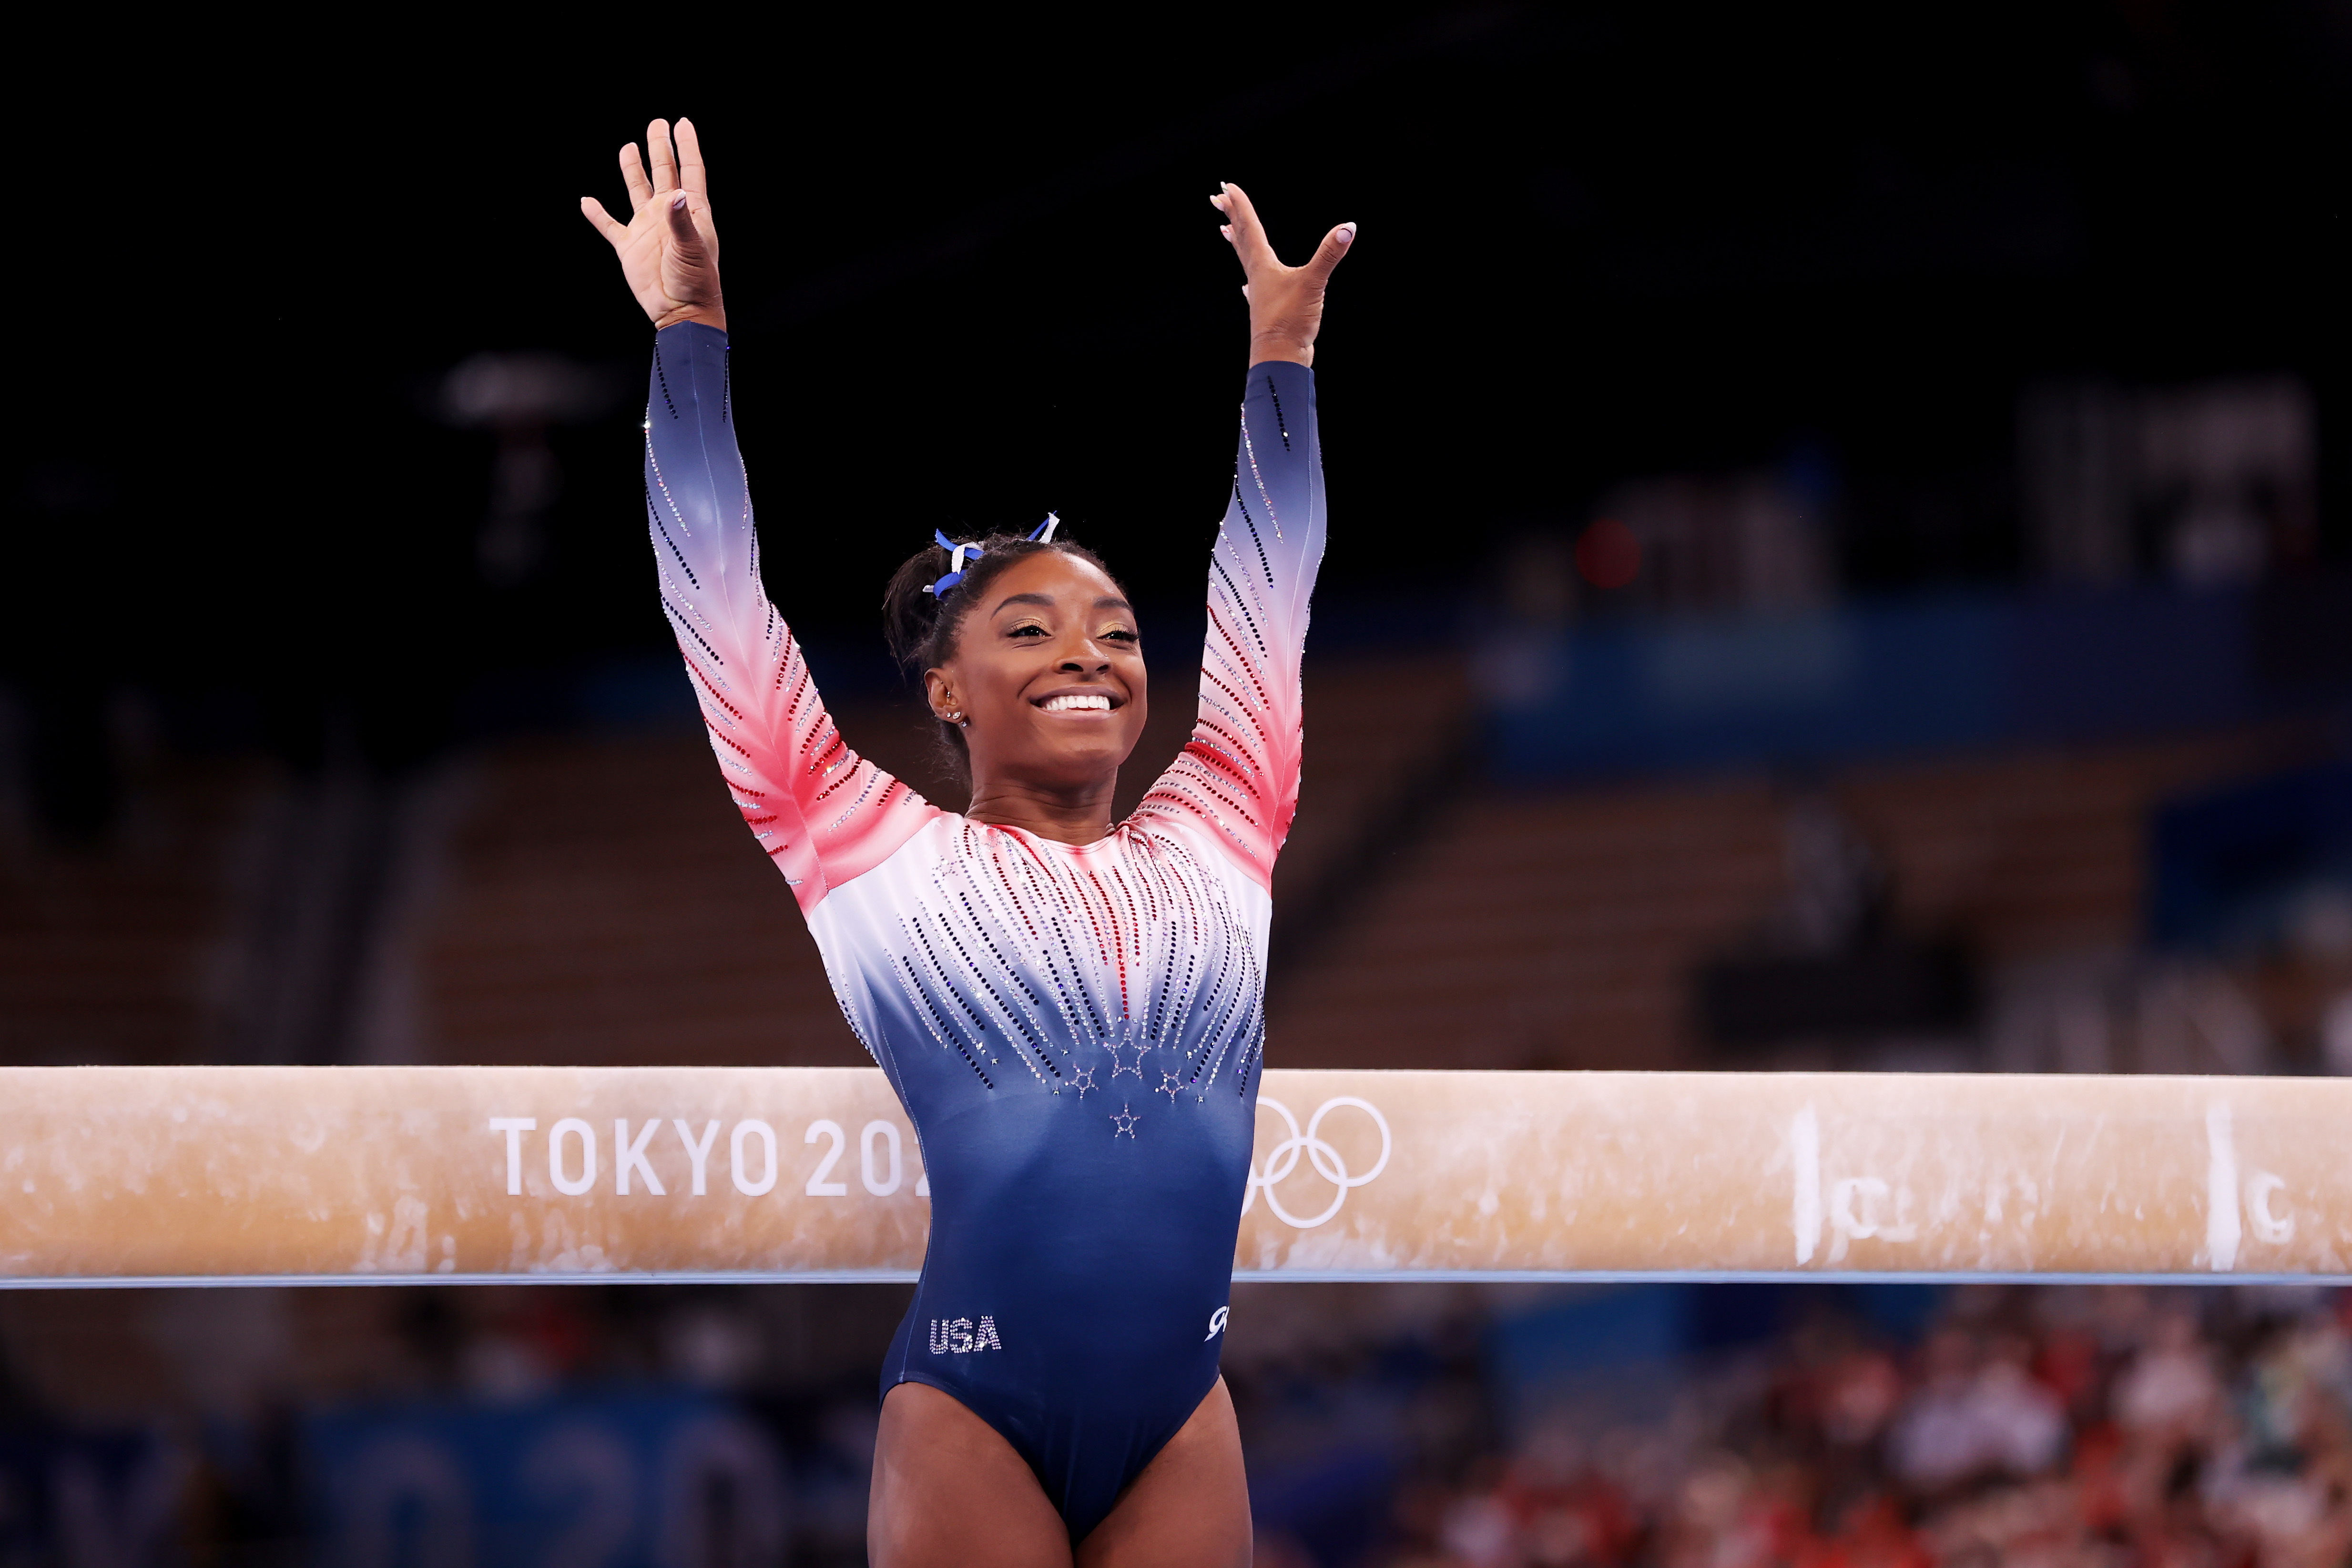 Simone Biles of Team United States competes in the Women's Balance Beam Final on day eleven of the Tokyo 2020 Olympic Games at Ariake Gymnastics Centre on, August 3, 2021, in Tokyo, Japan. | Source: Getty Images